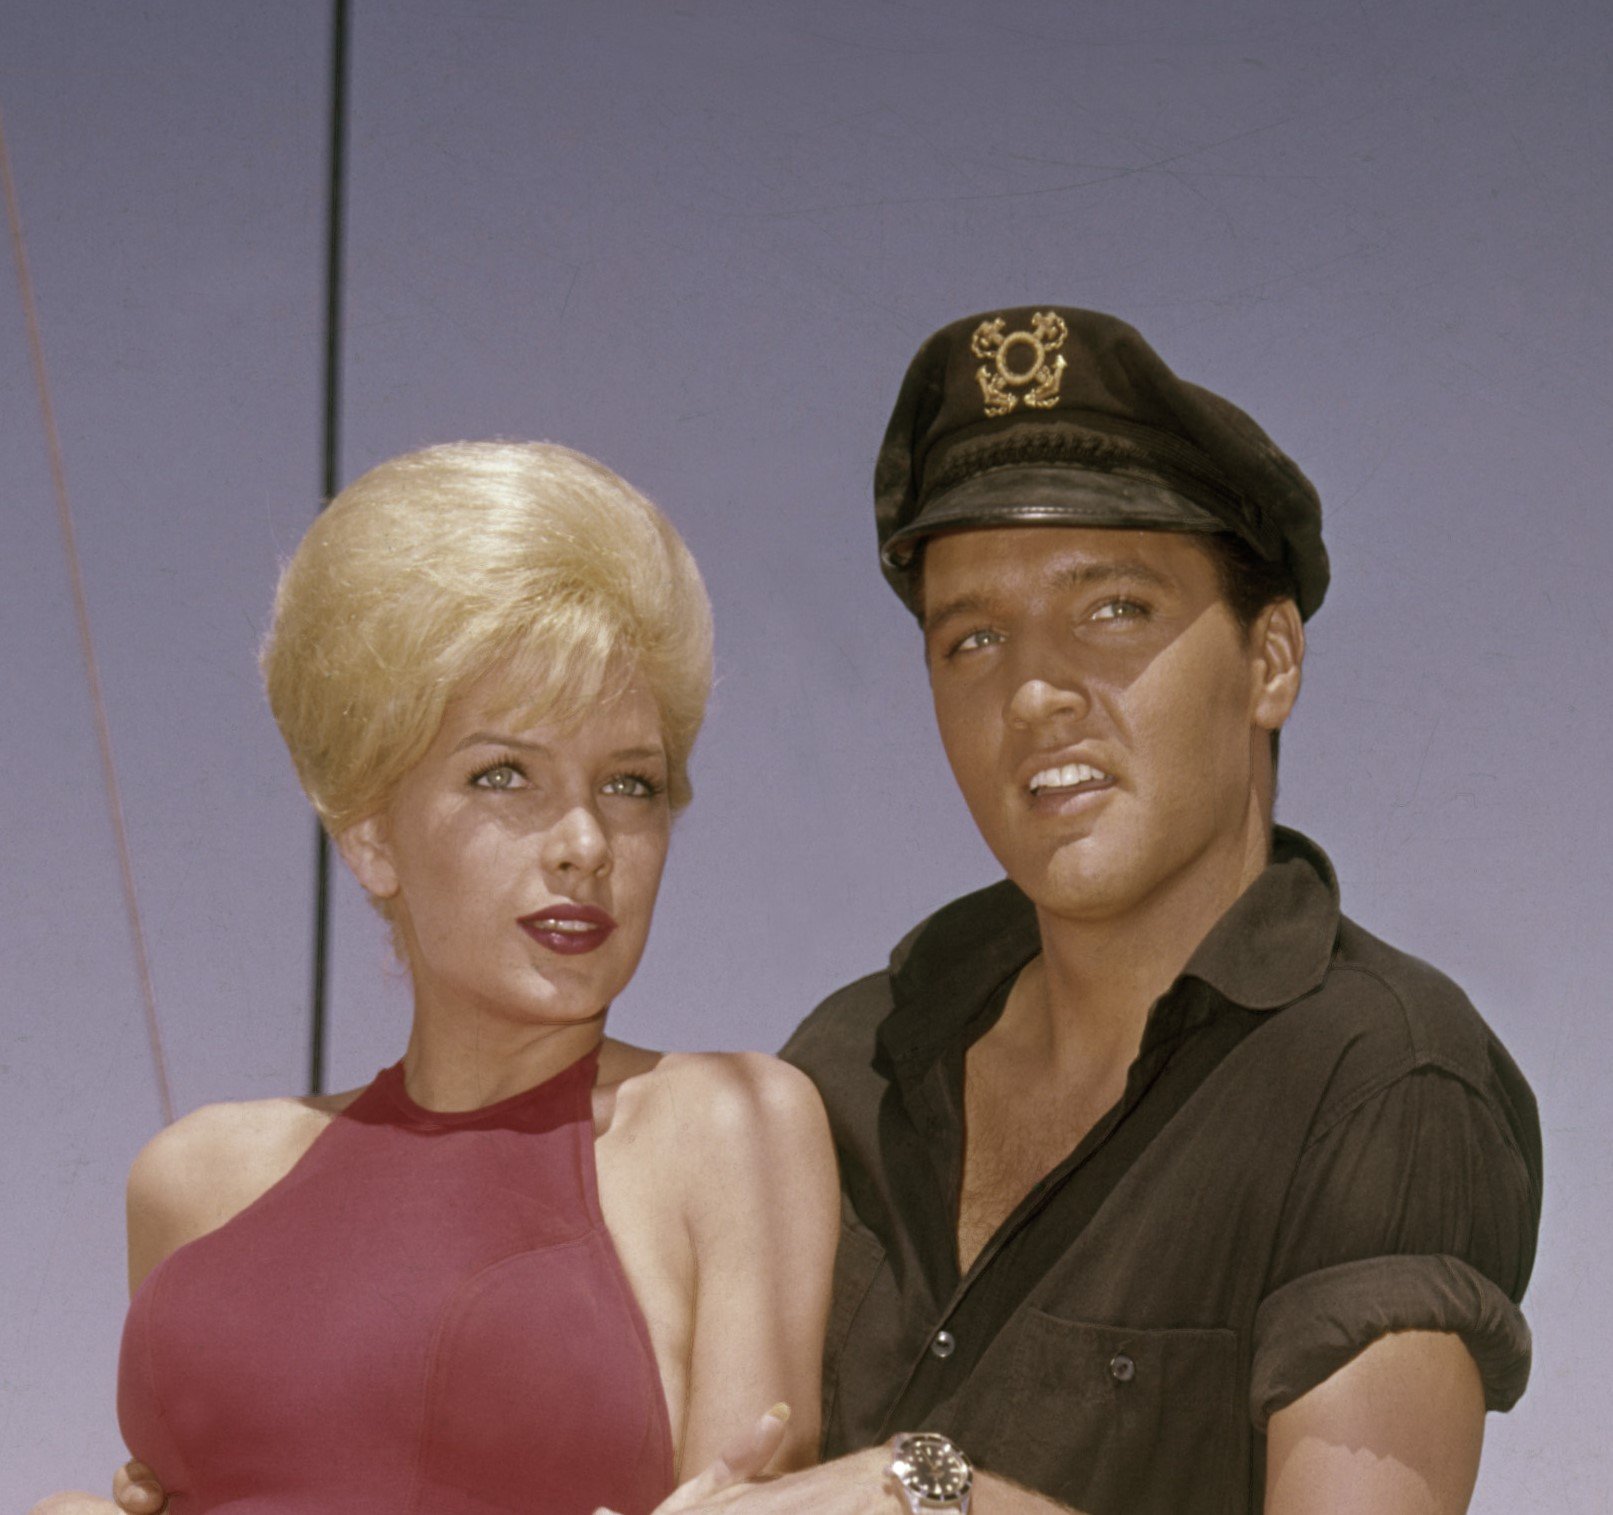 Pat Priest and Elvis Presley in a promotional image for the movie 'Easy Come, Easy Go'